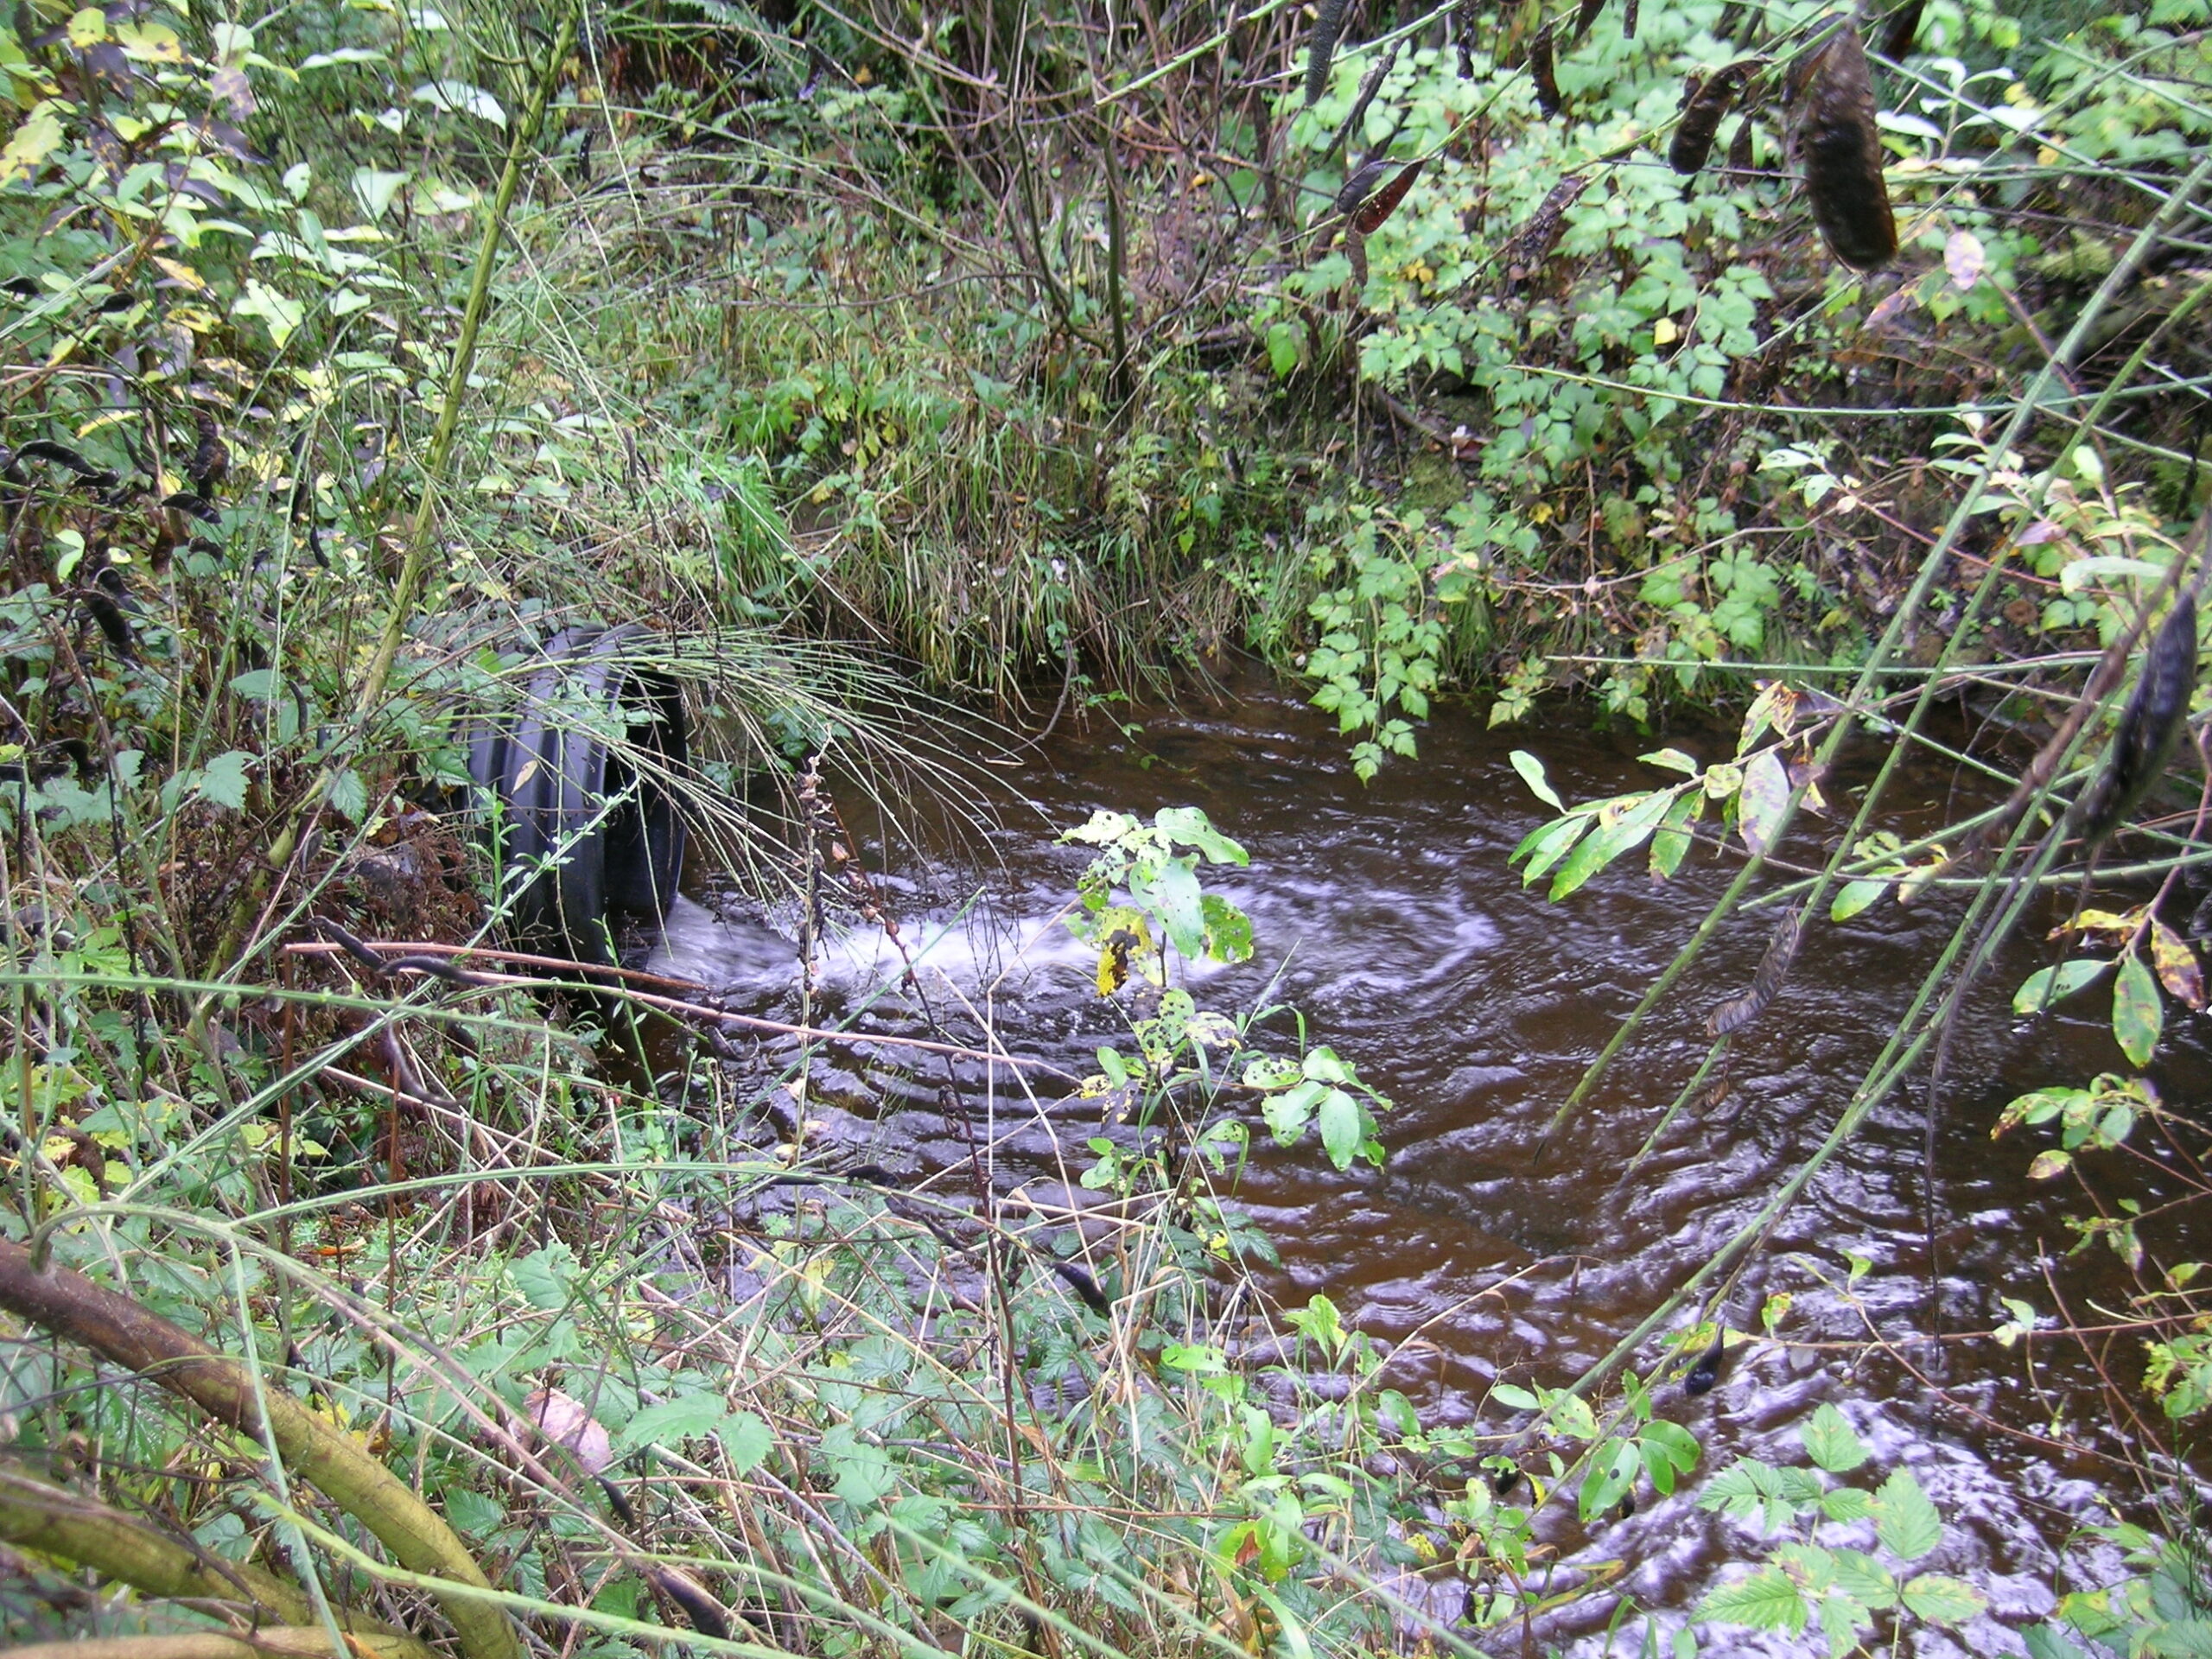 There is a healthy amount of riparian plants on either sides of the bank. Through the center of the photo there is a stream rushing out of a culvert into a small pool.